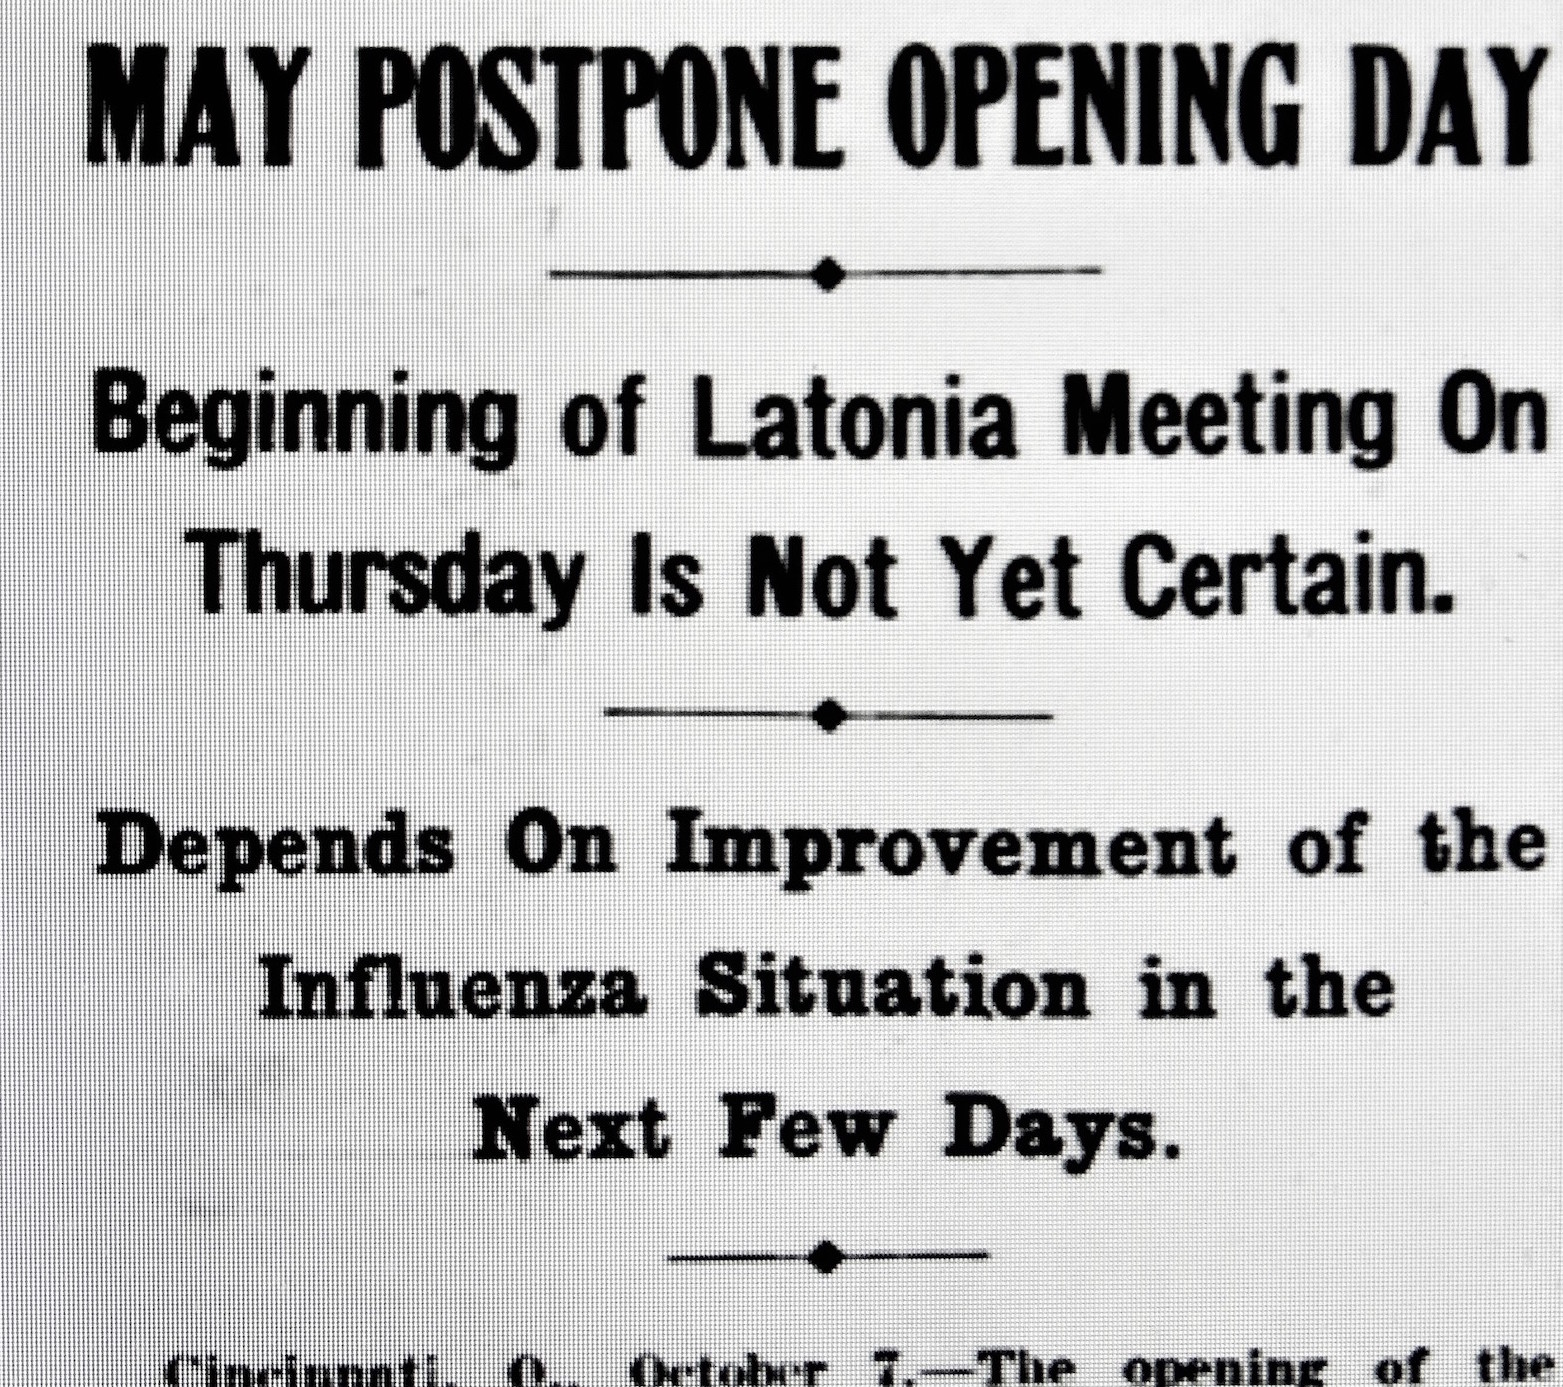 October 8, 1918: the Daily Racing Form headline on the postponement of the Latonia meeting